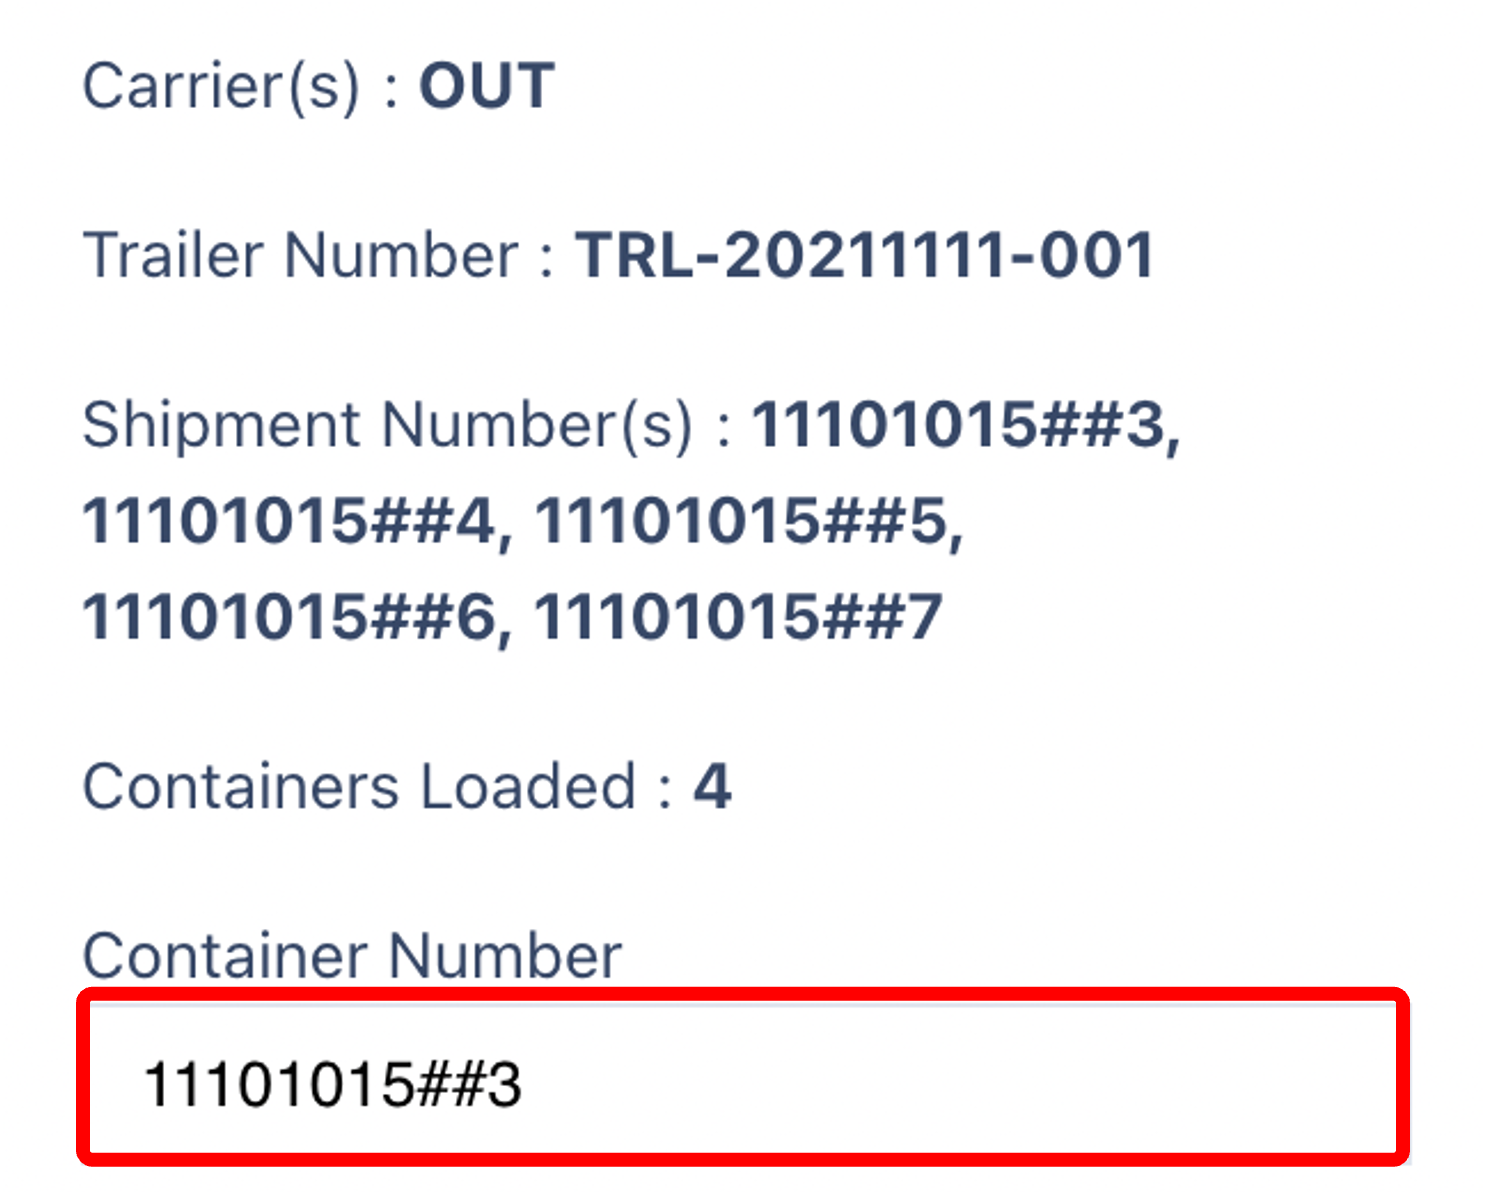 enter container number(1)